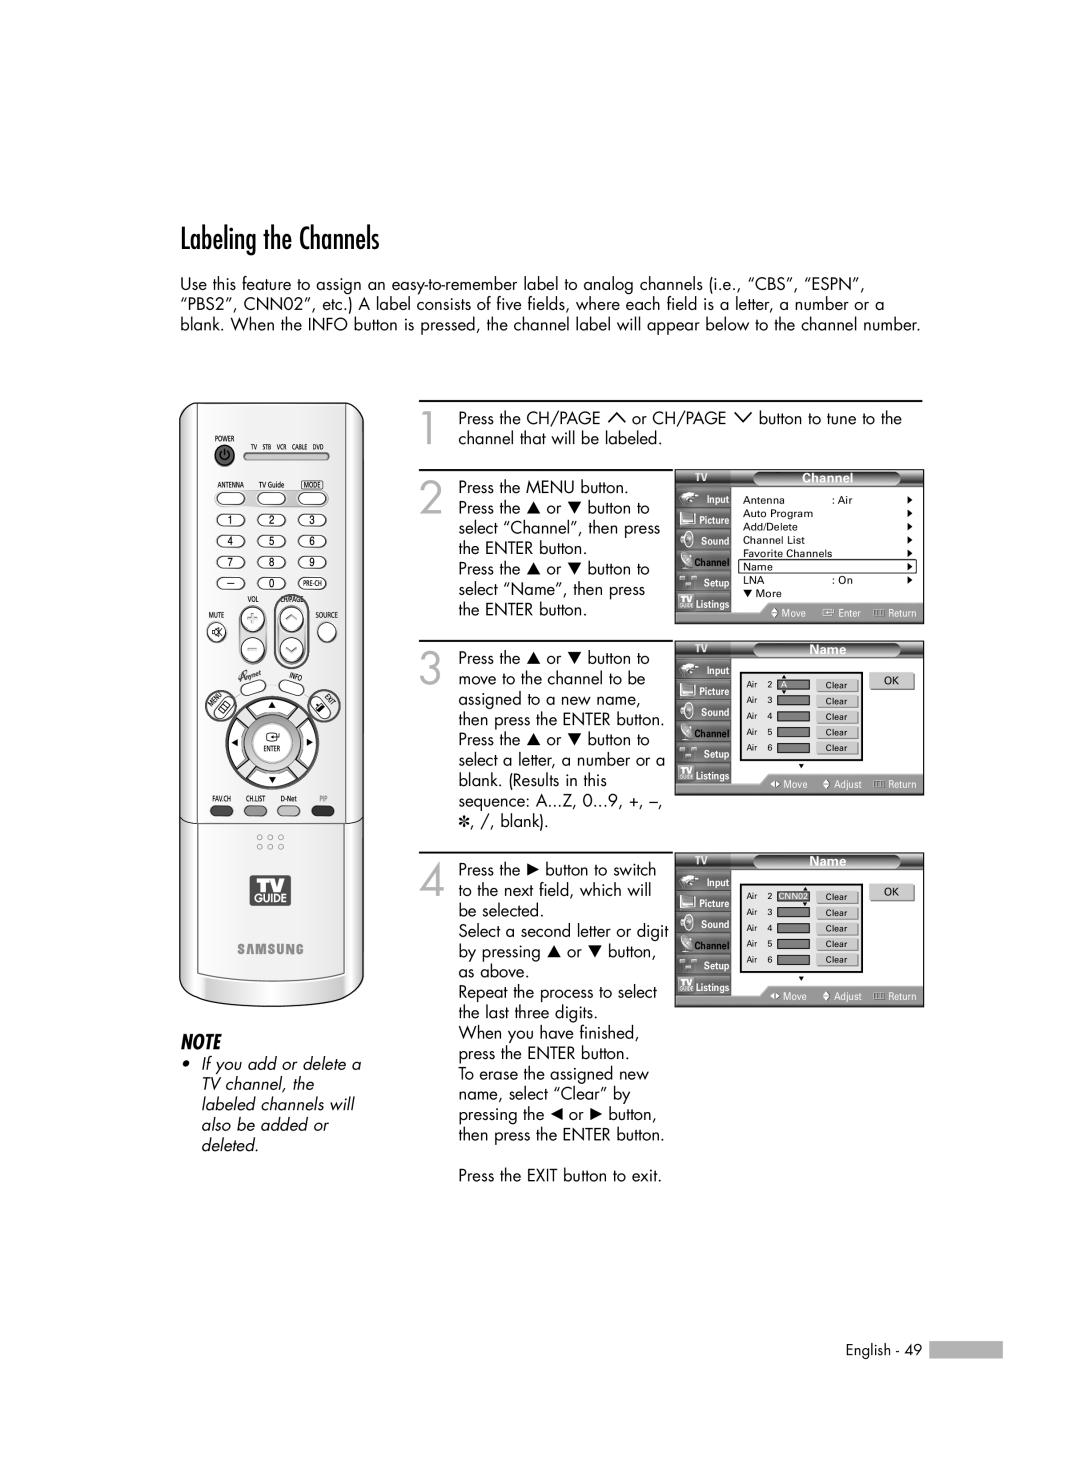 Samsung HL-R5688W manual Labeling the Channels, Name 